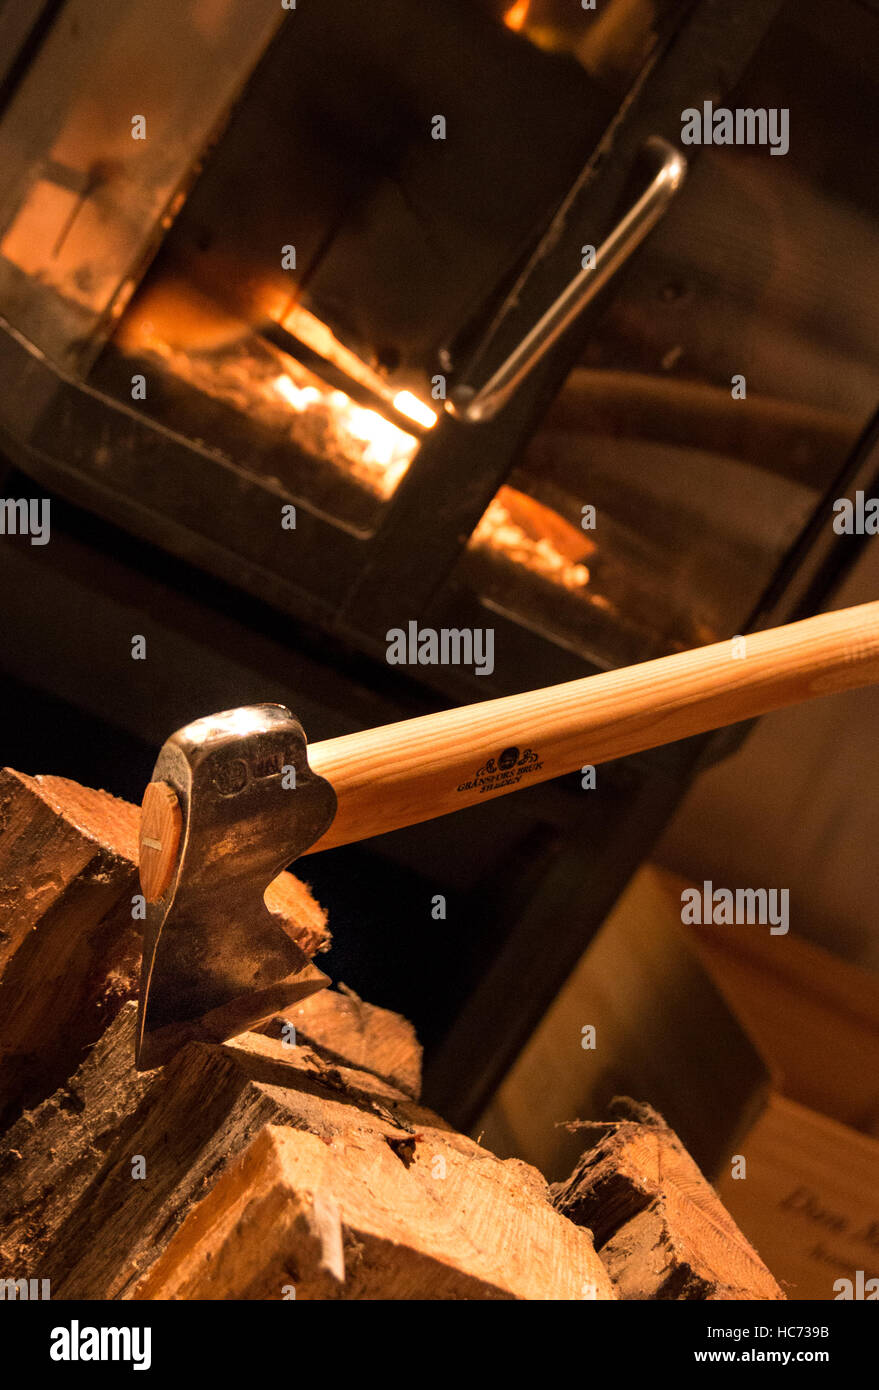 Wood for cosy evening Stock Photo